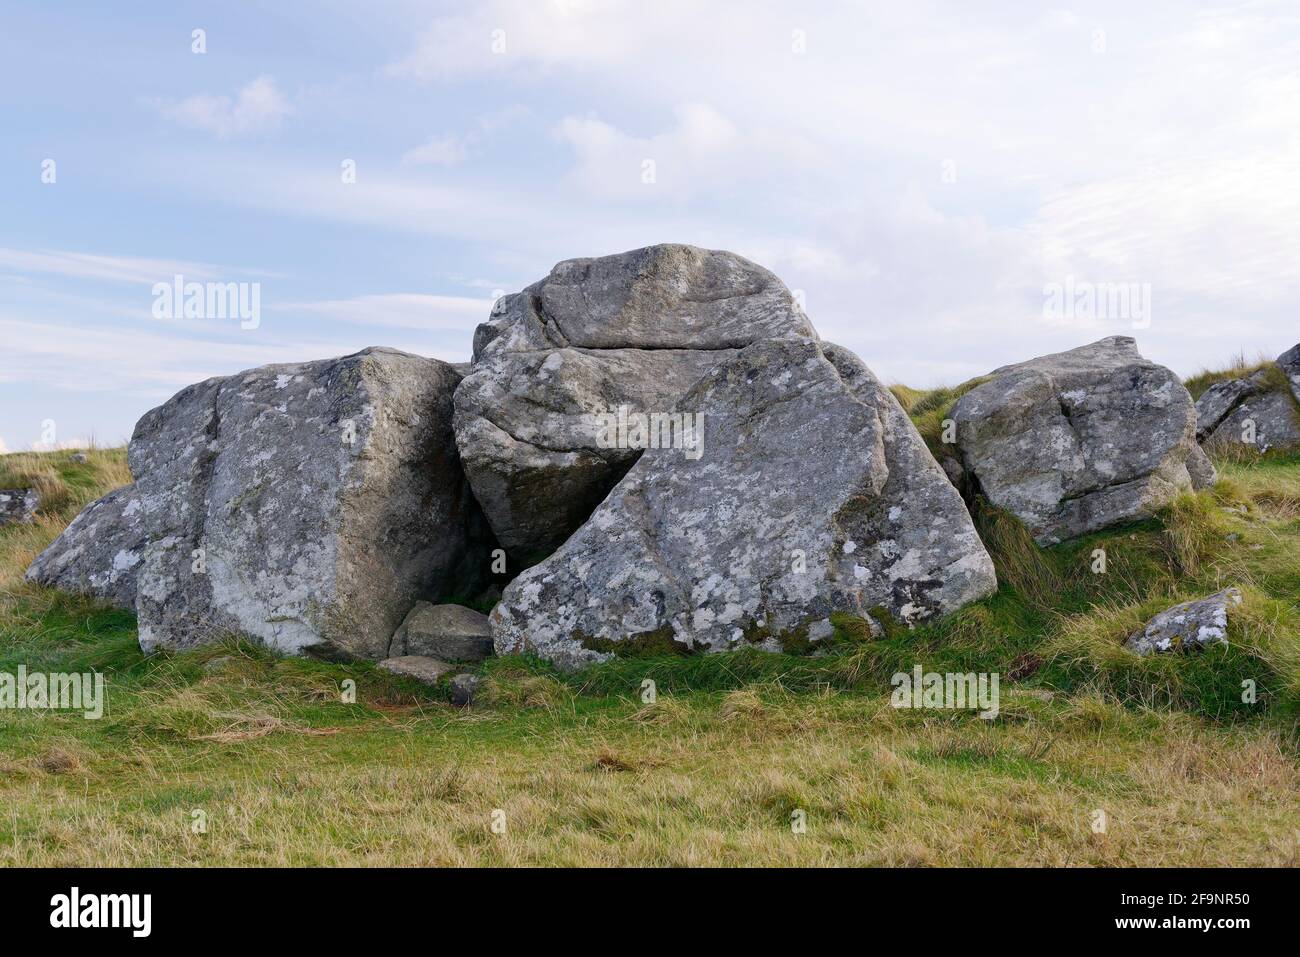 Tursachan prehistoric stones at Callanish, Lewis, Scotland aka Callanish I. Crag and tail rock outcrop structure forming the focal point of the stones Stock Photo